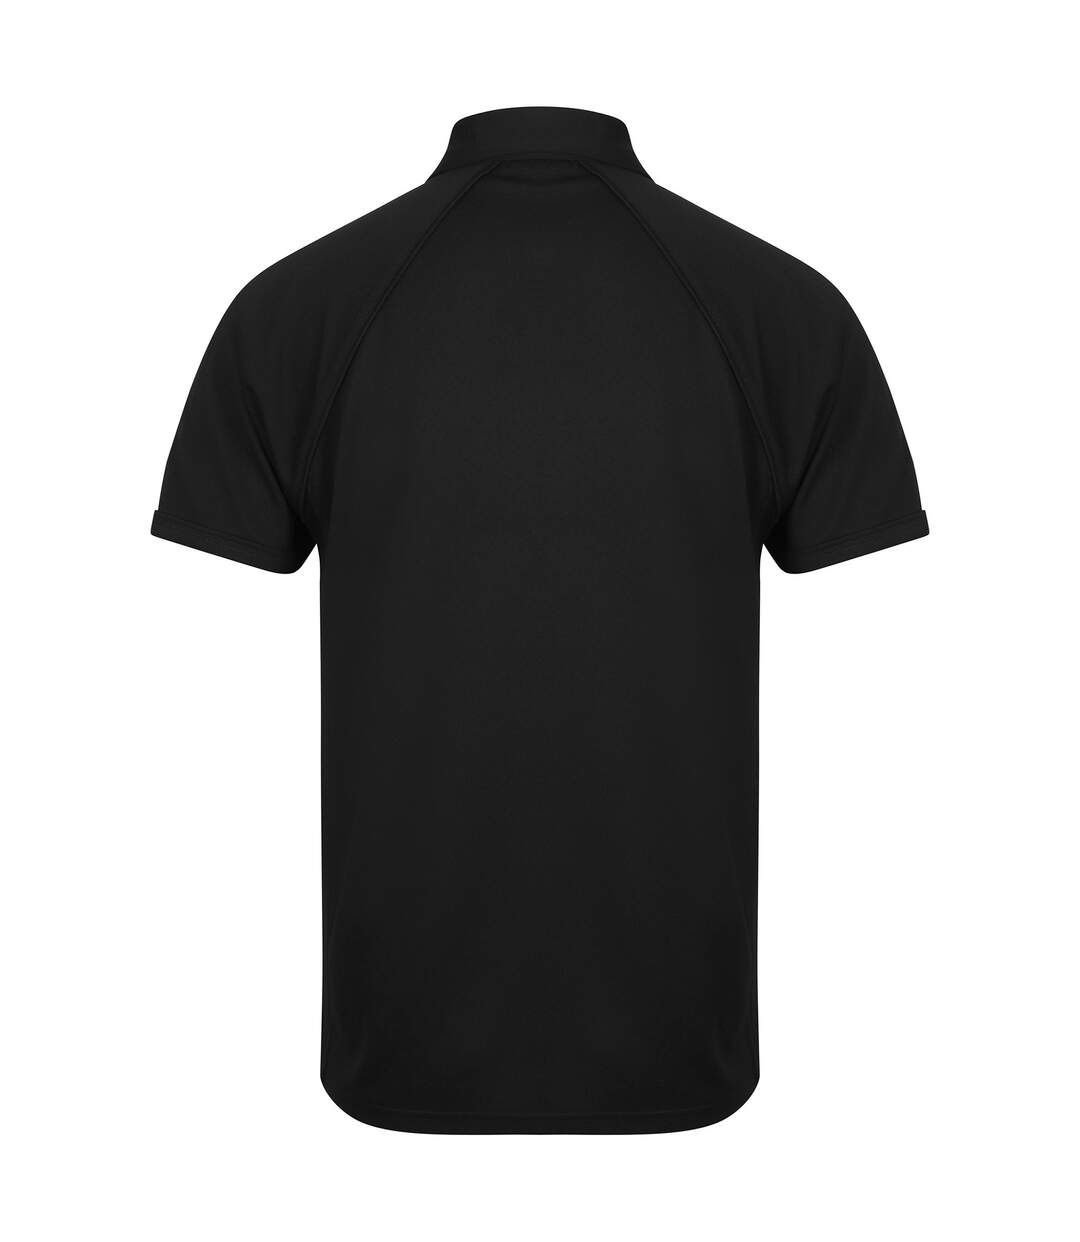 Finden & Hales Mens Piped Performance Sports Polo Shirt (Black/Black)